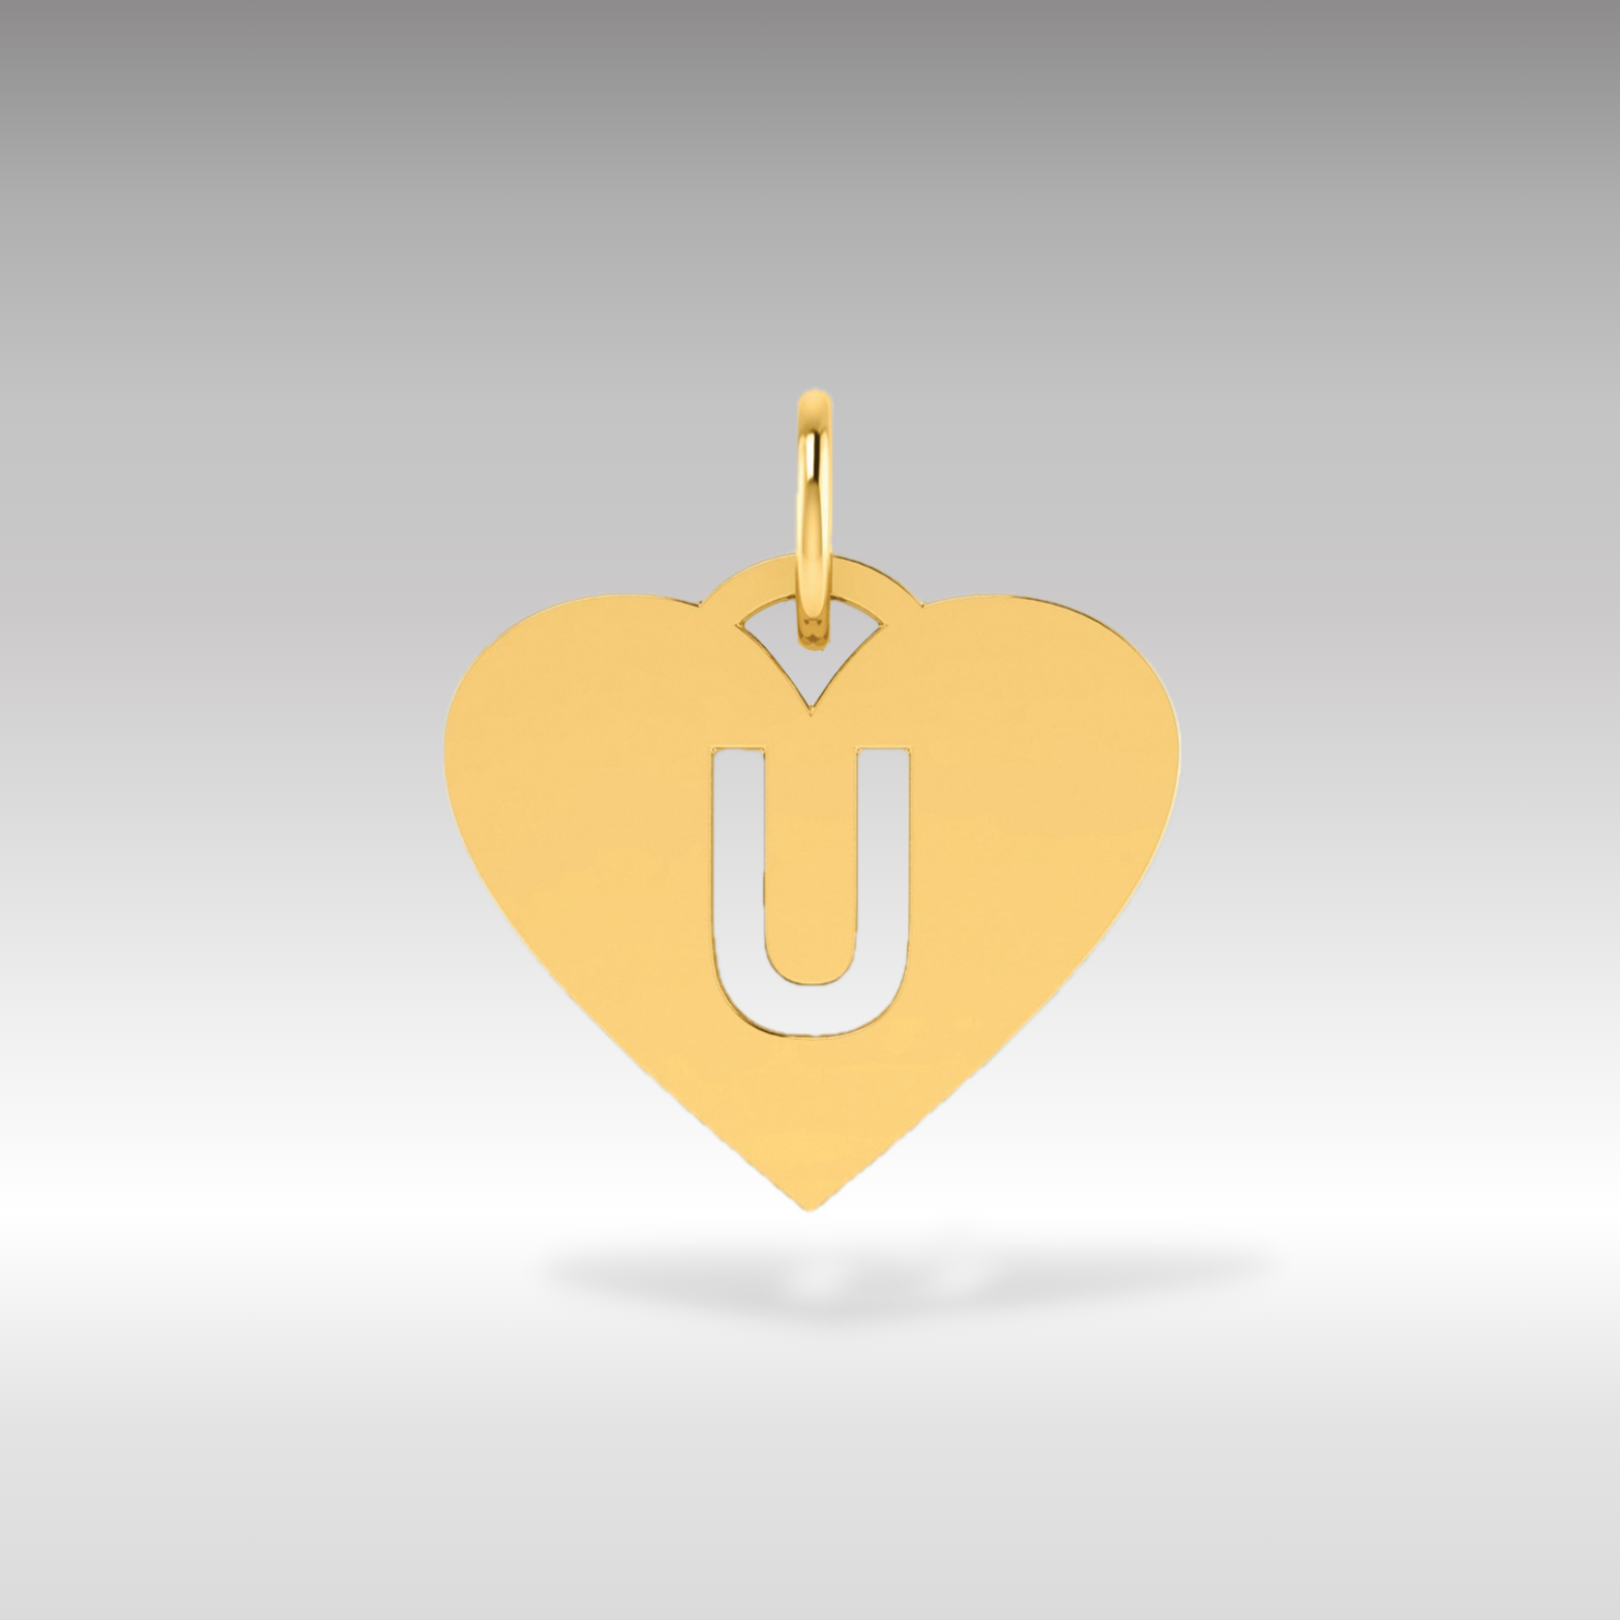 14K Gold Heart Pendant with Letter 'U' - Charlie & Co. Jewelry